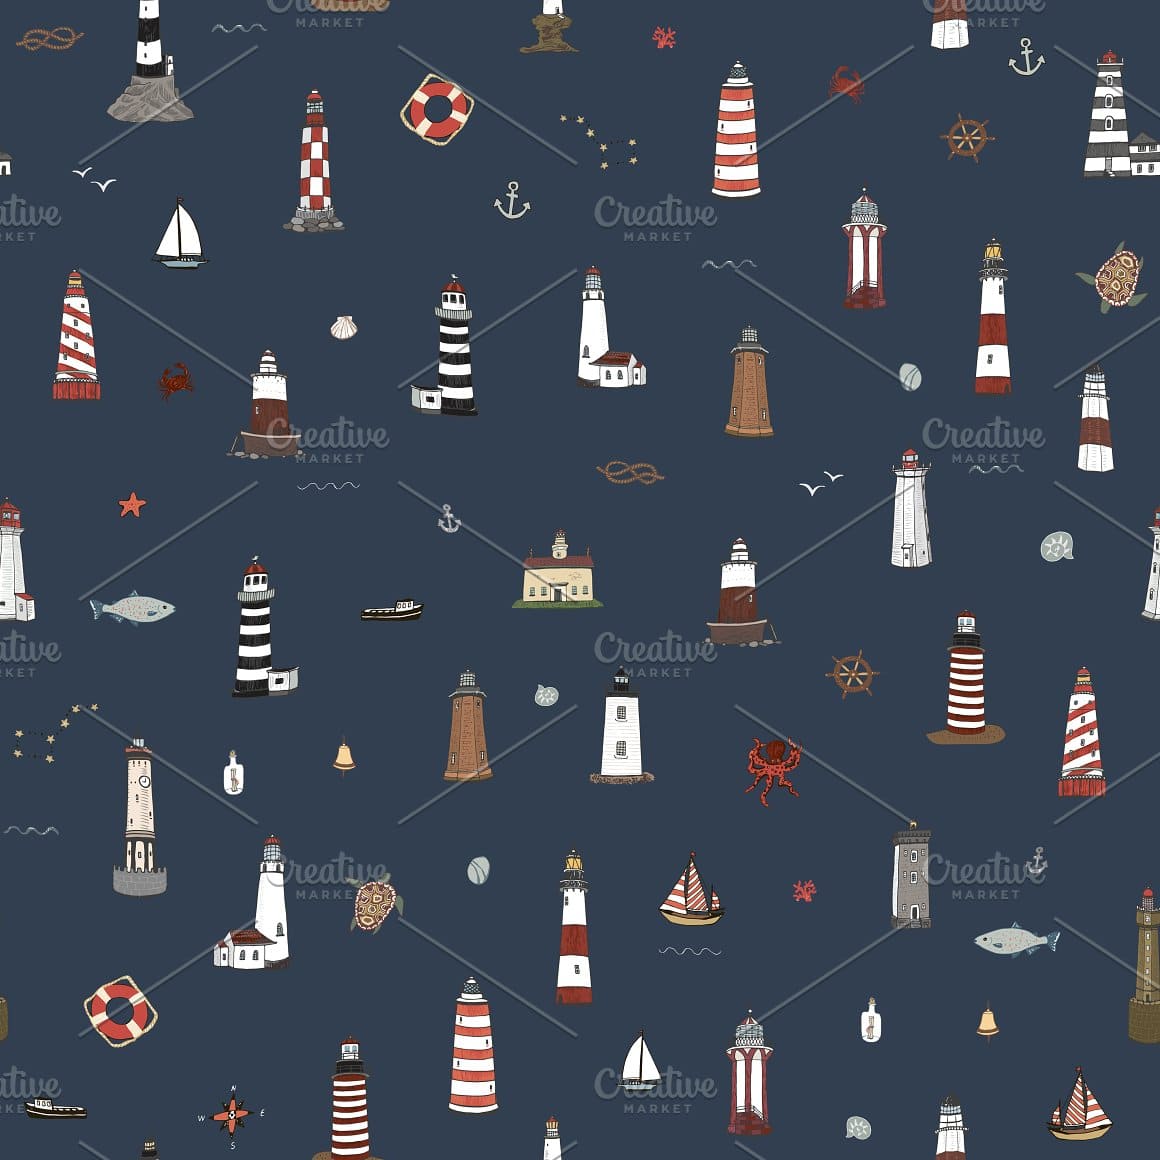 Small lighthouses, anchors, nautical knots, etc. are drawn on a dark blue background.